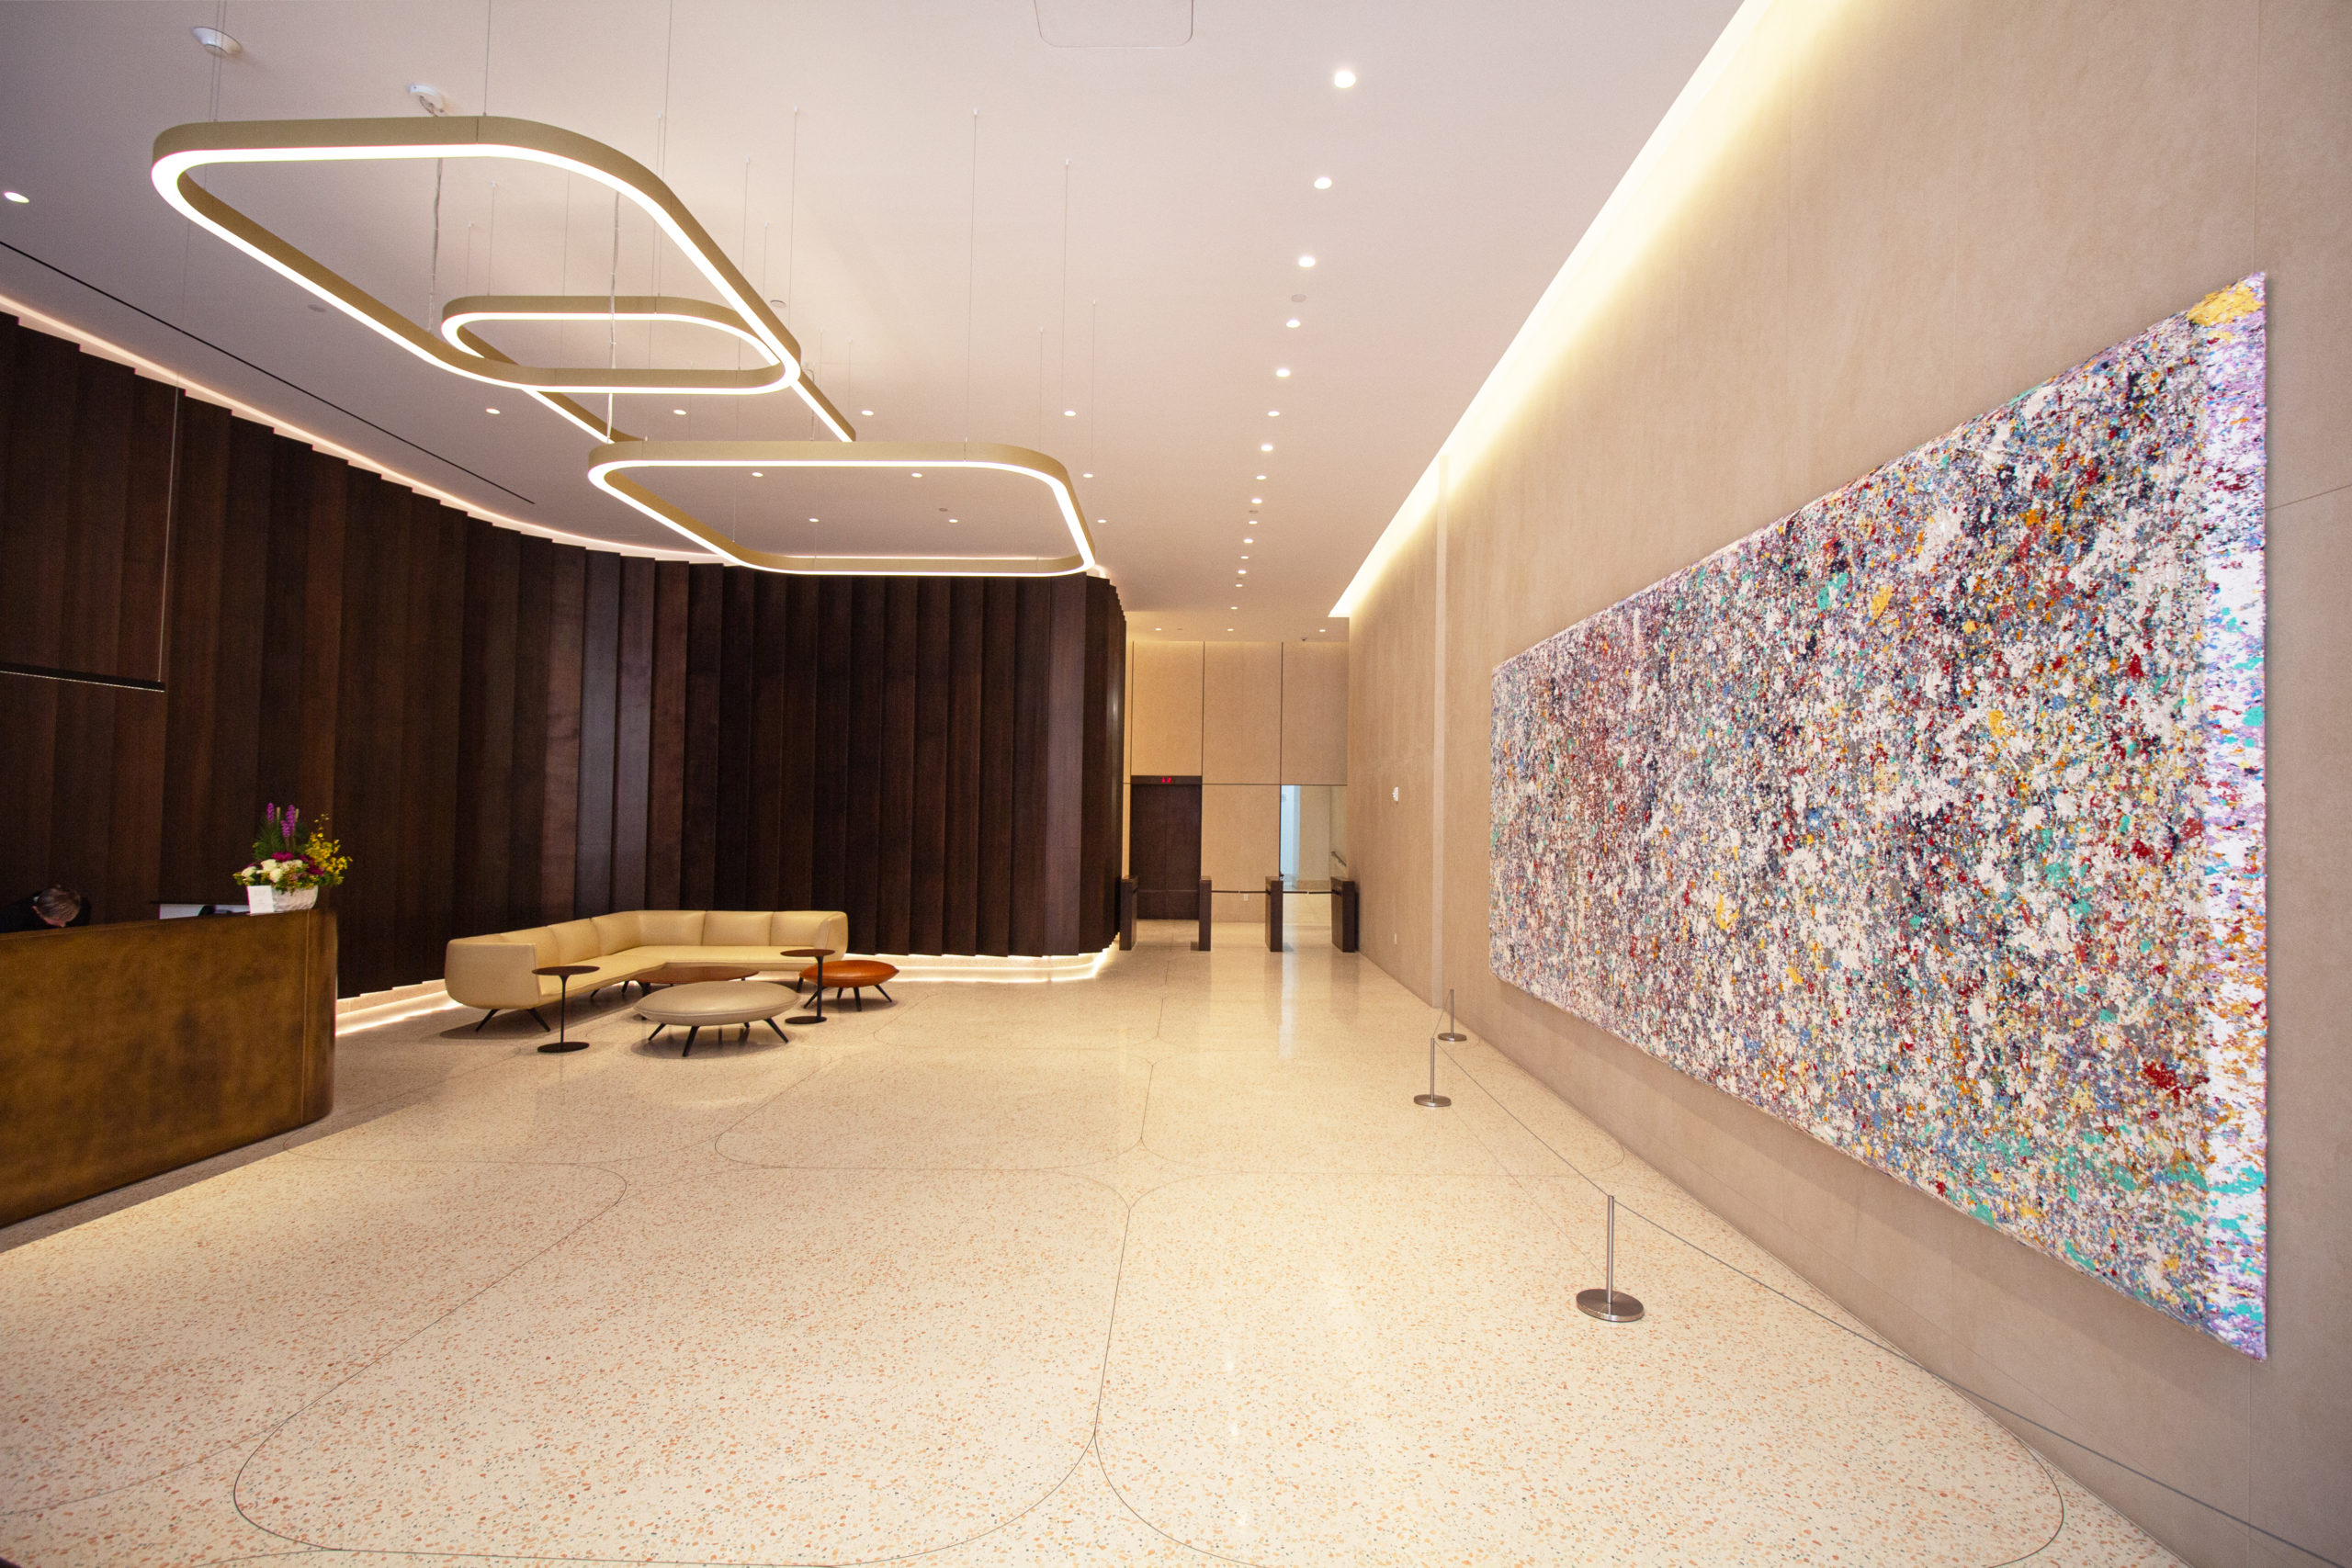 The sleek new lobby and painting by For The 'Friend' (2022) - Painted by Sam Gilliam at 122 Fifth Avenue in Manhattan